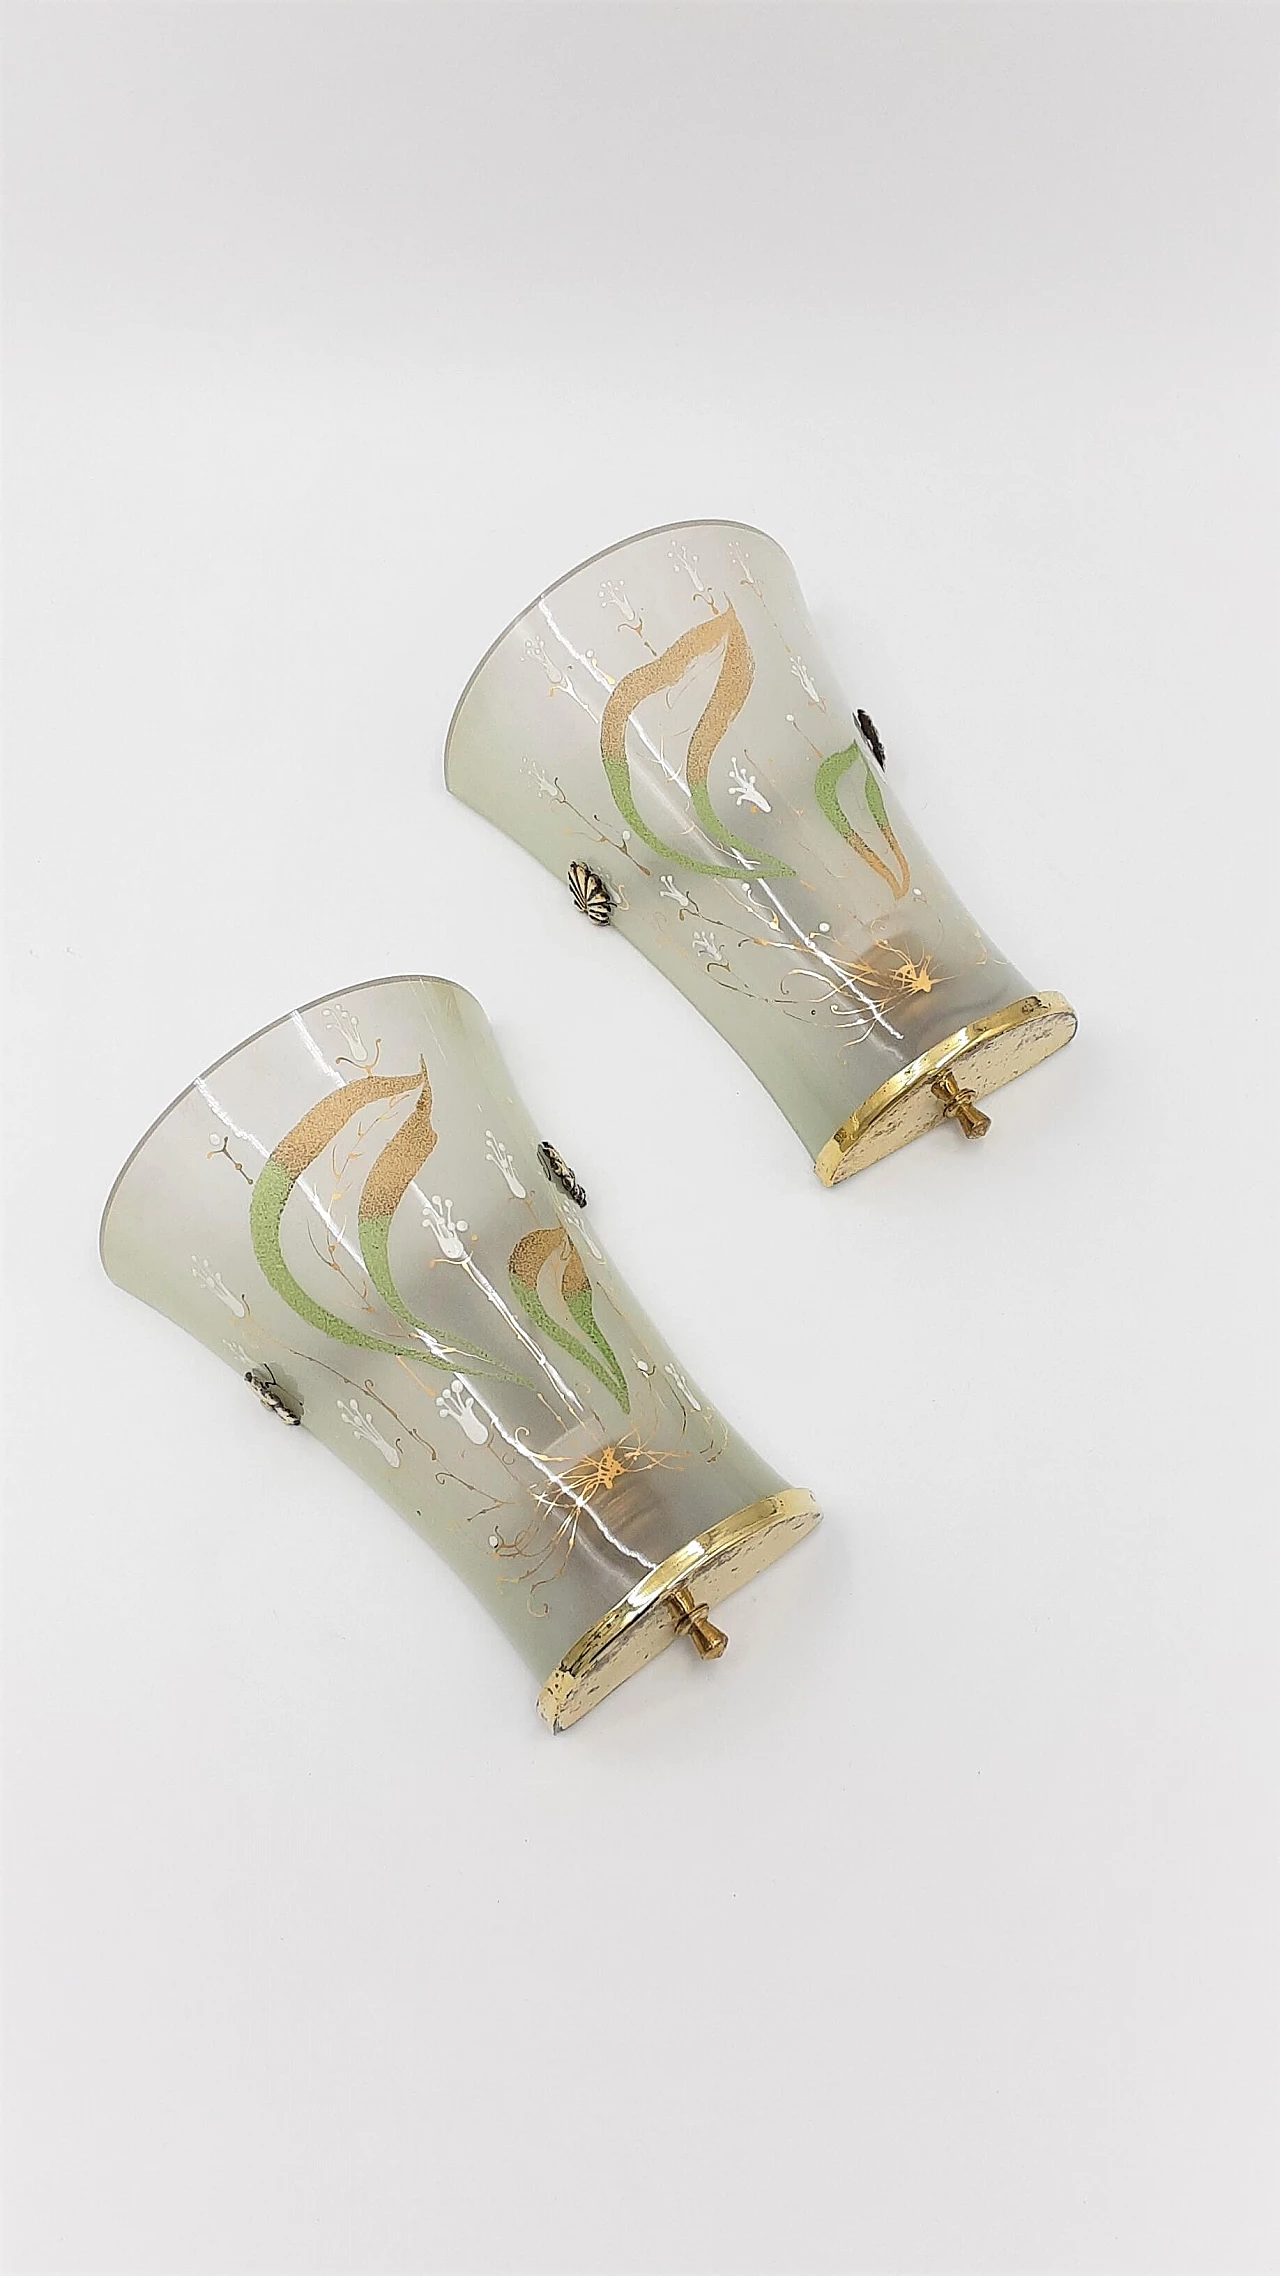 Pair of Art Nouveau hand-decorated glass wall sconces, 1910s 1